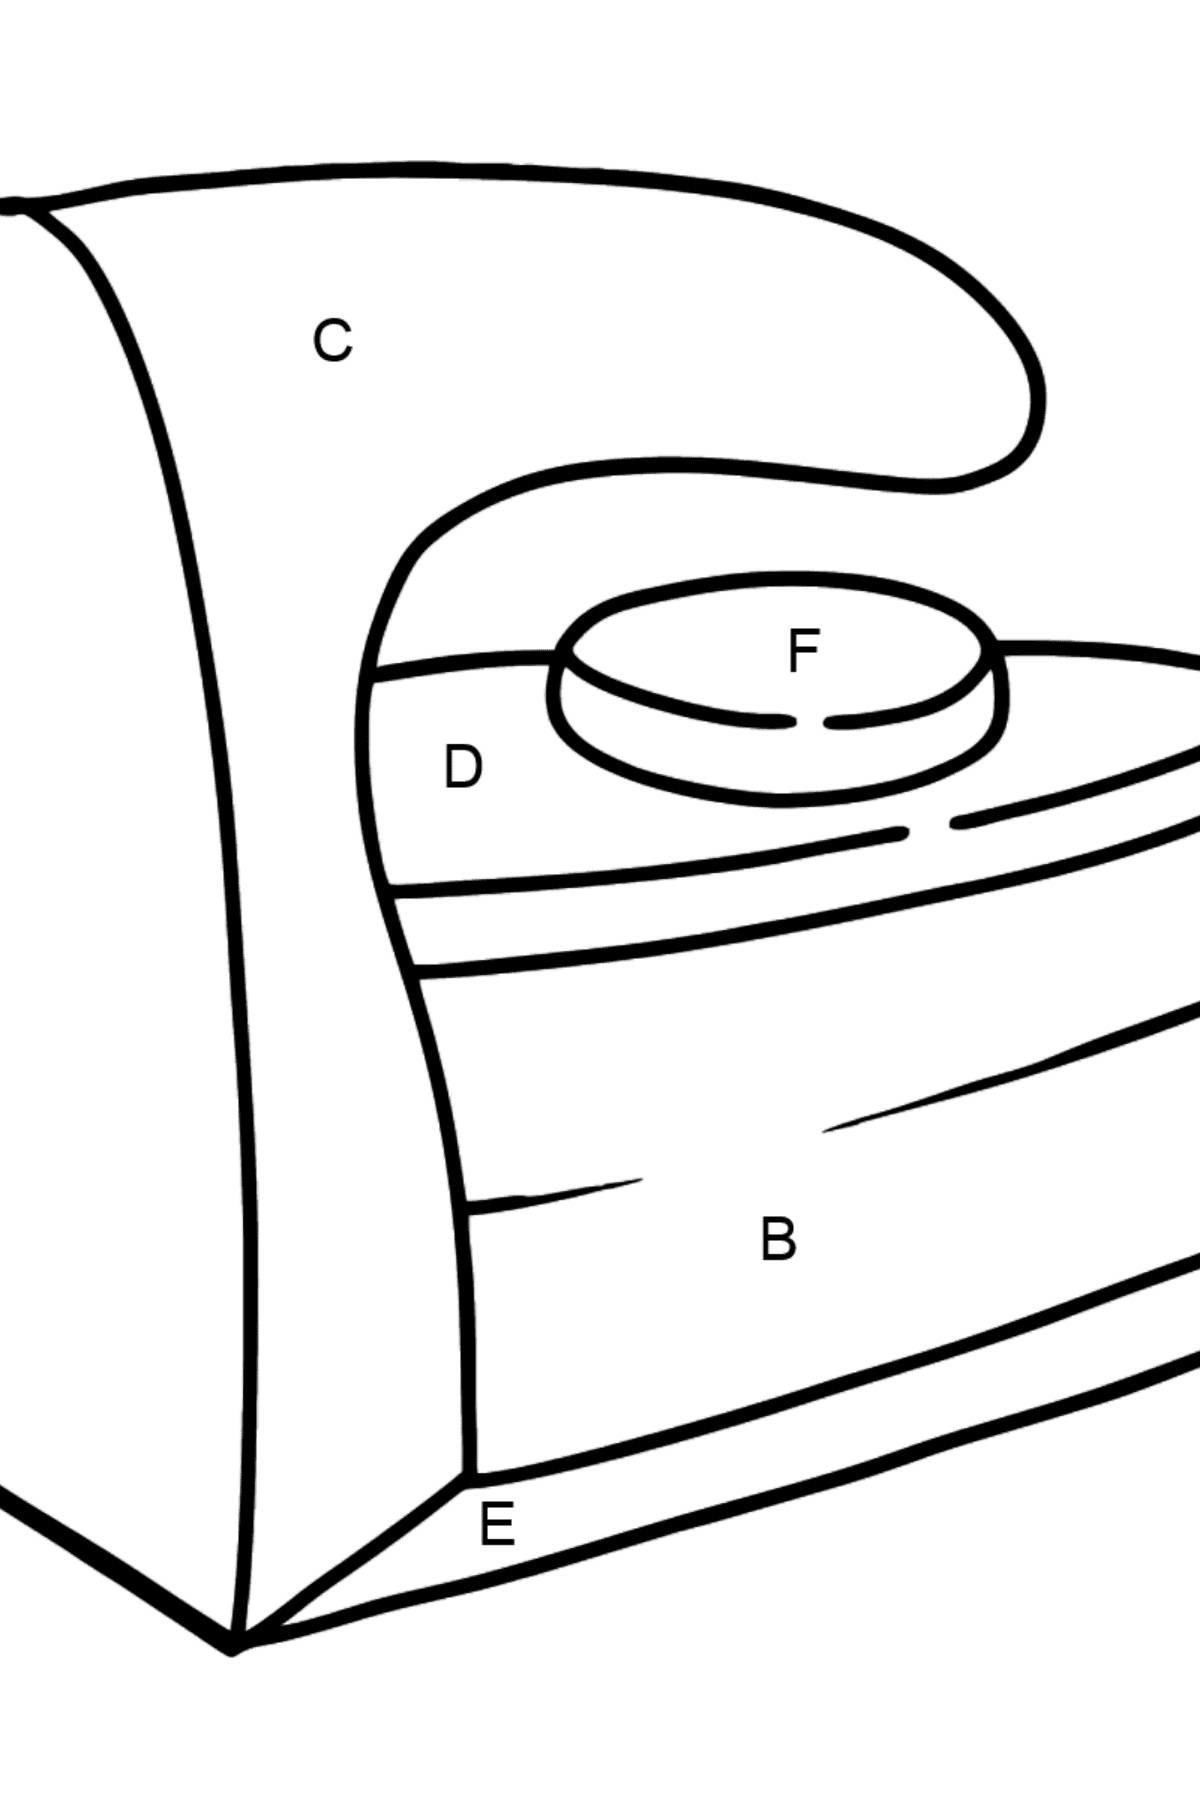 Iron for ironing coloring page - Coloring by Letters for Kids